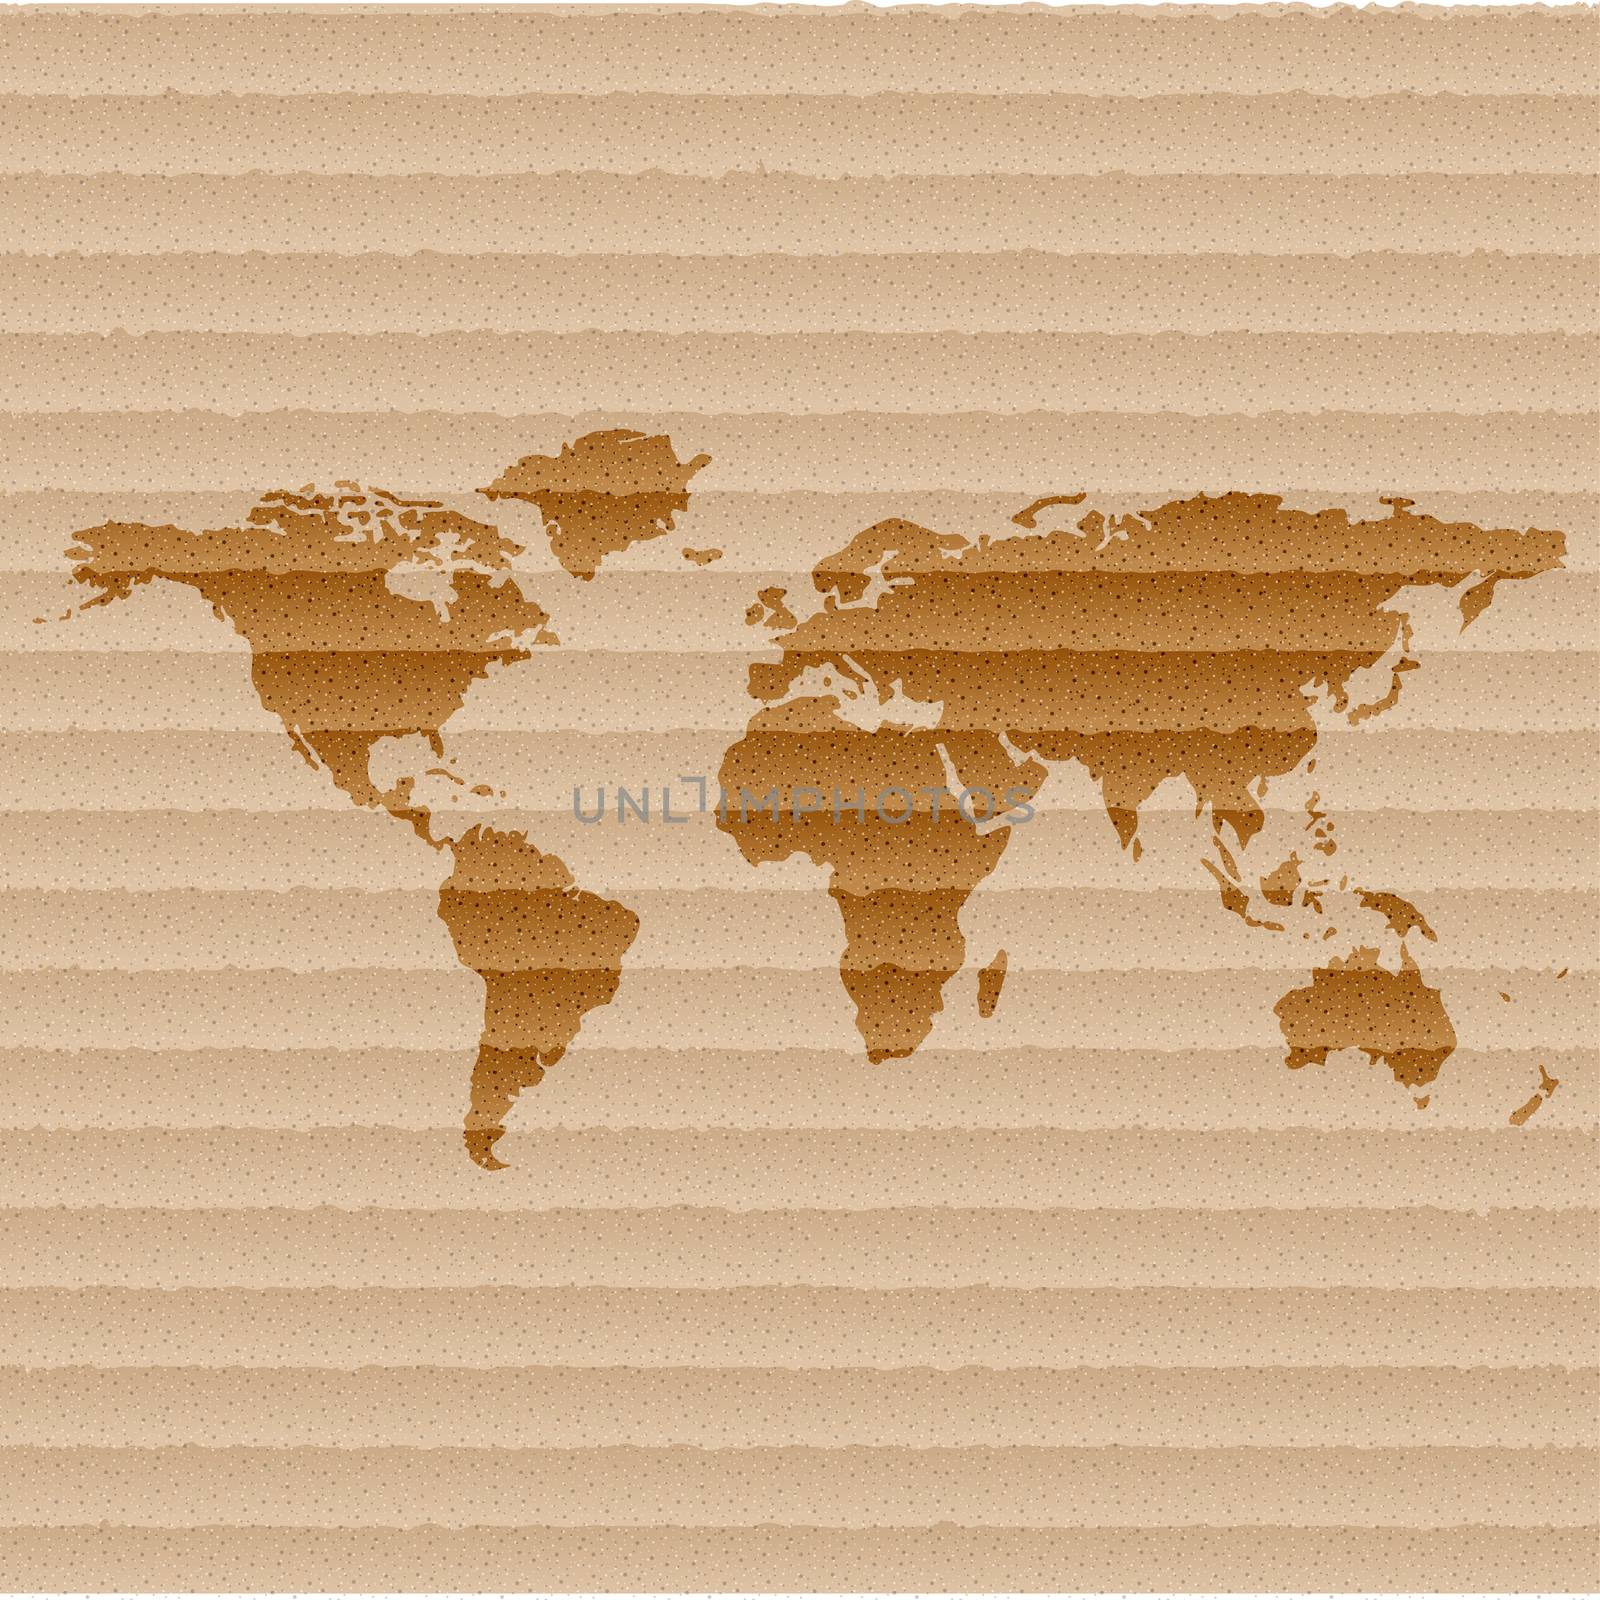 Detailed the most finest world map. flat design.